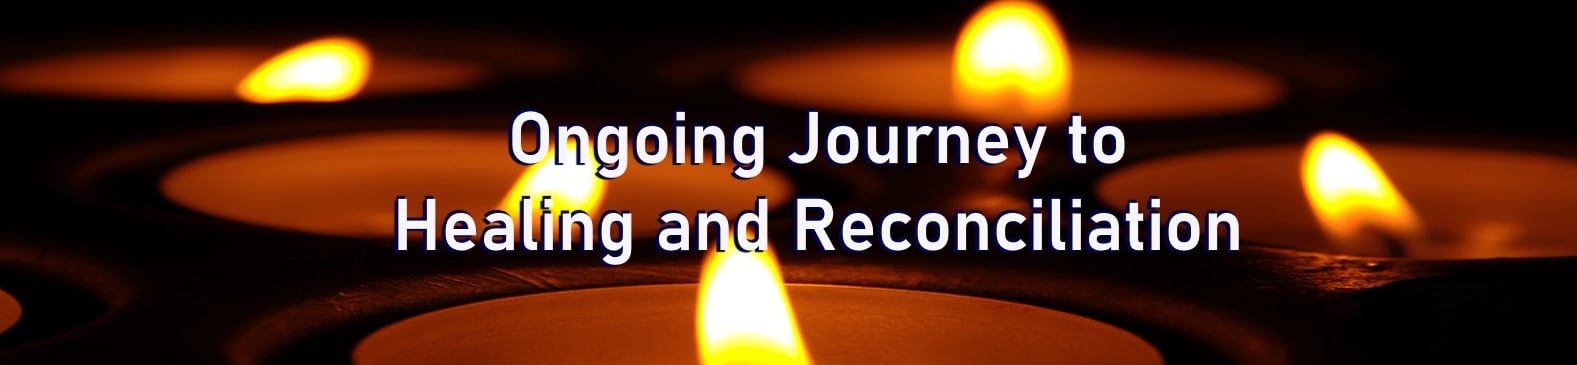 Ongoing Journey to Healing and Reconciliation